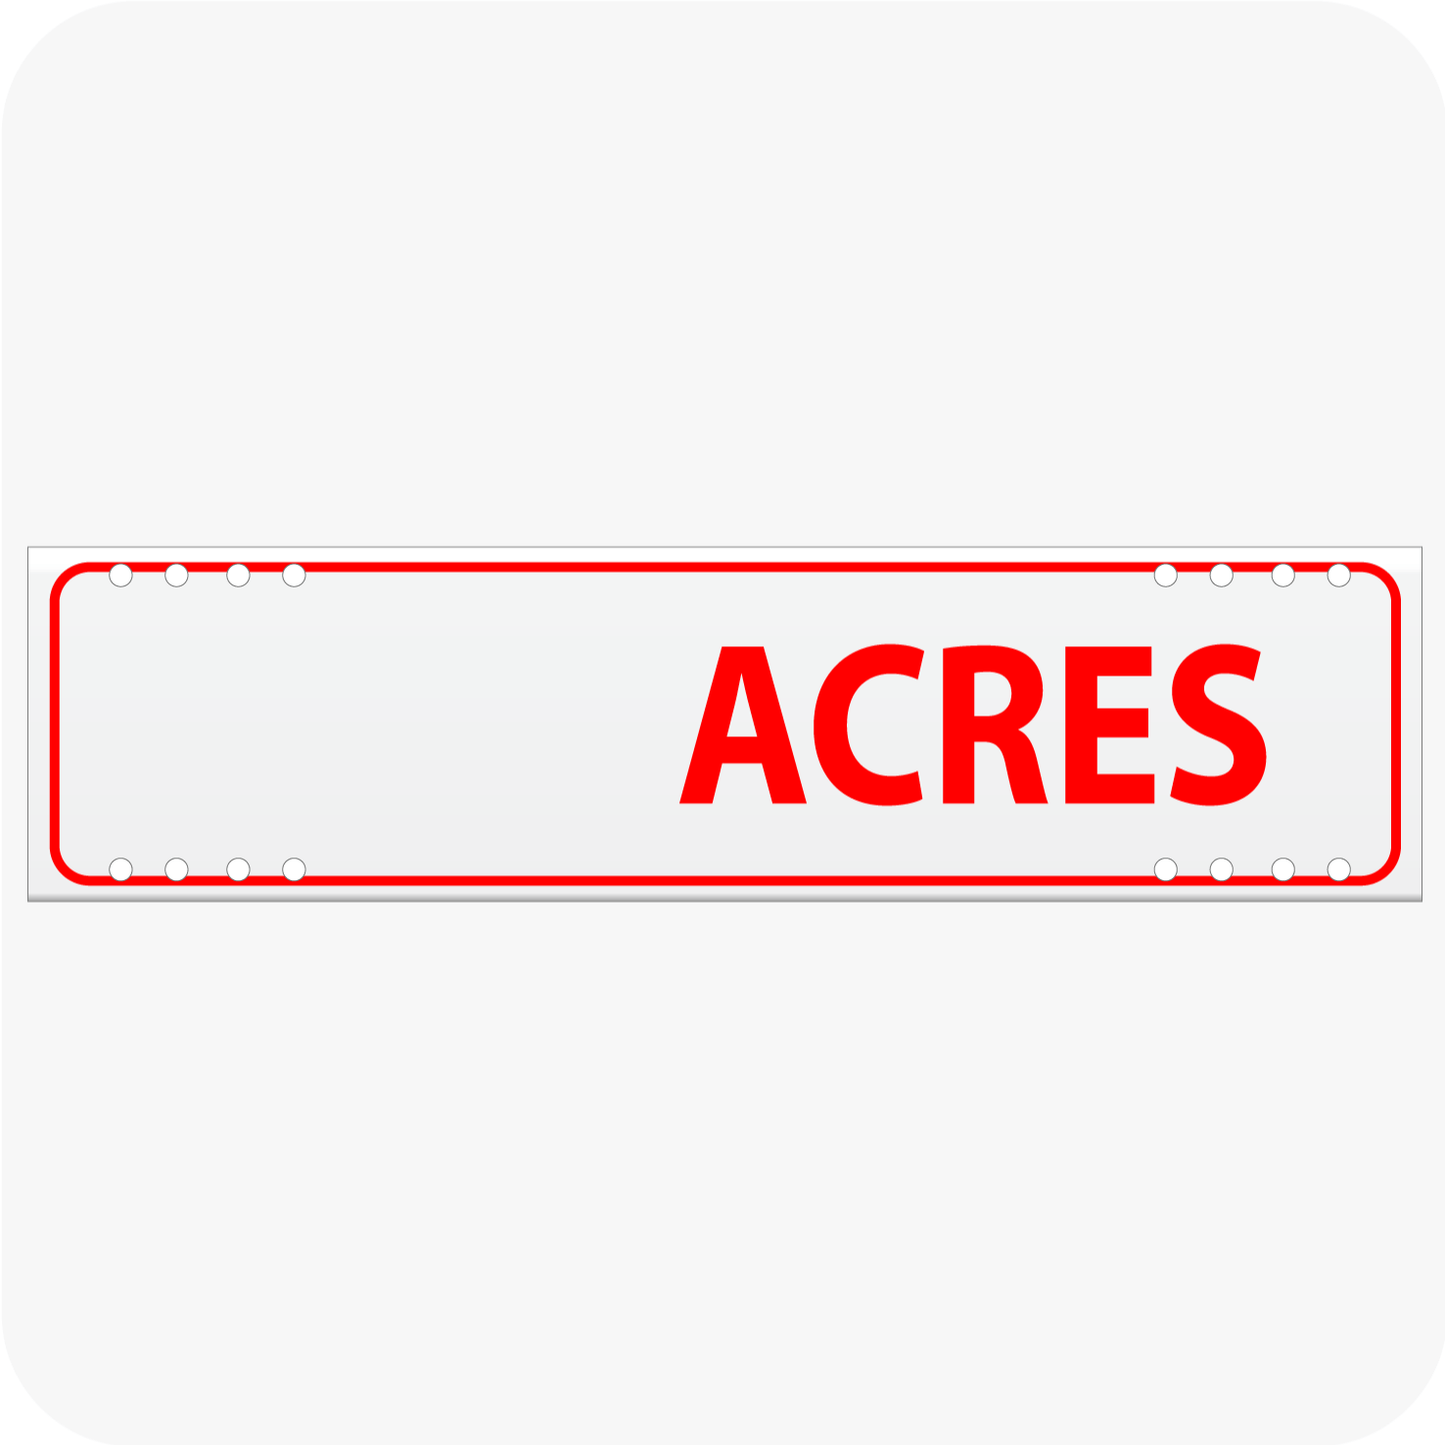 Blank Acres 6 x 24 Corrugated Rider - Red